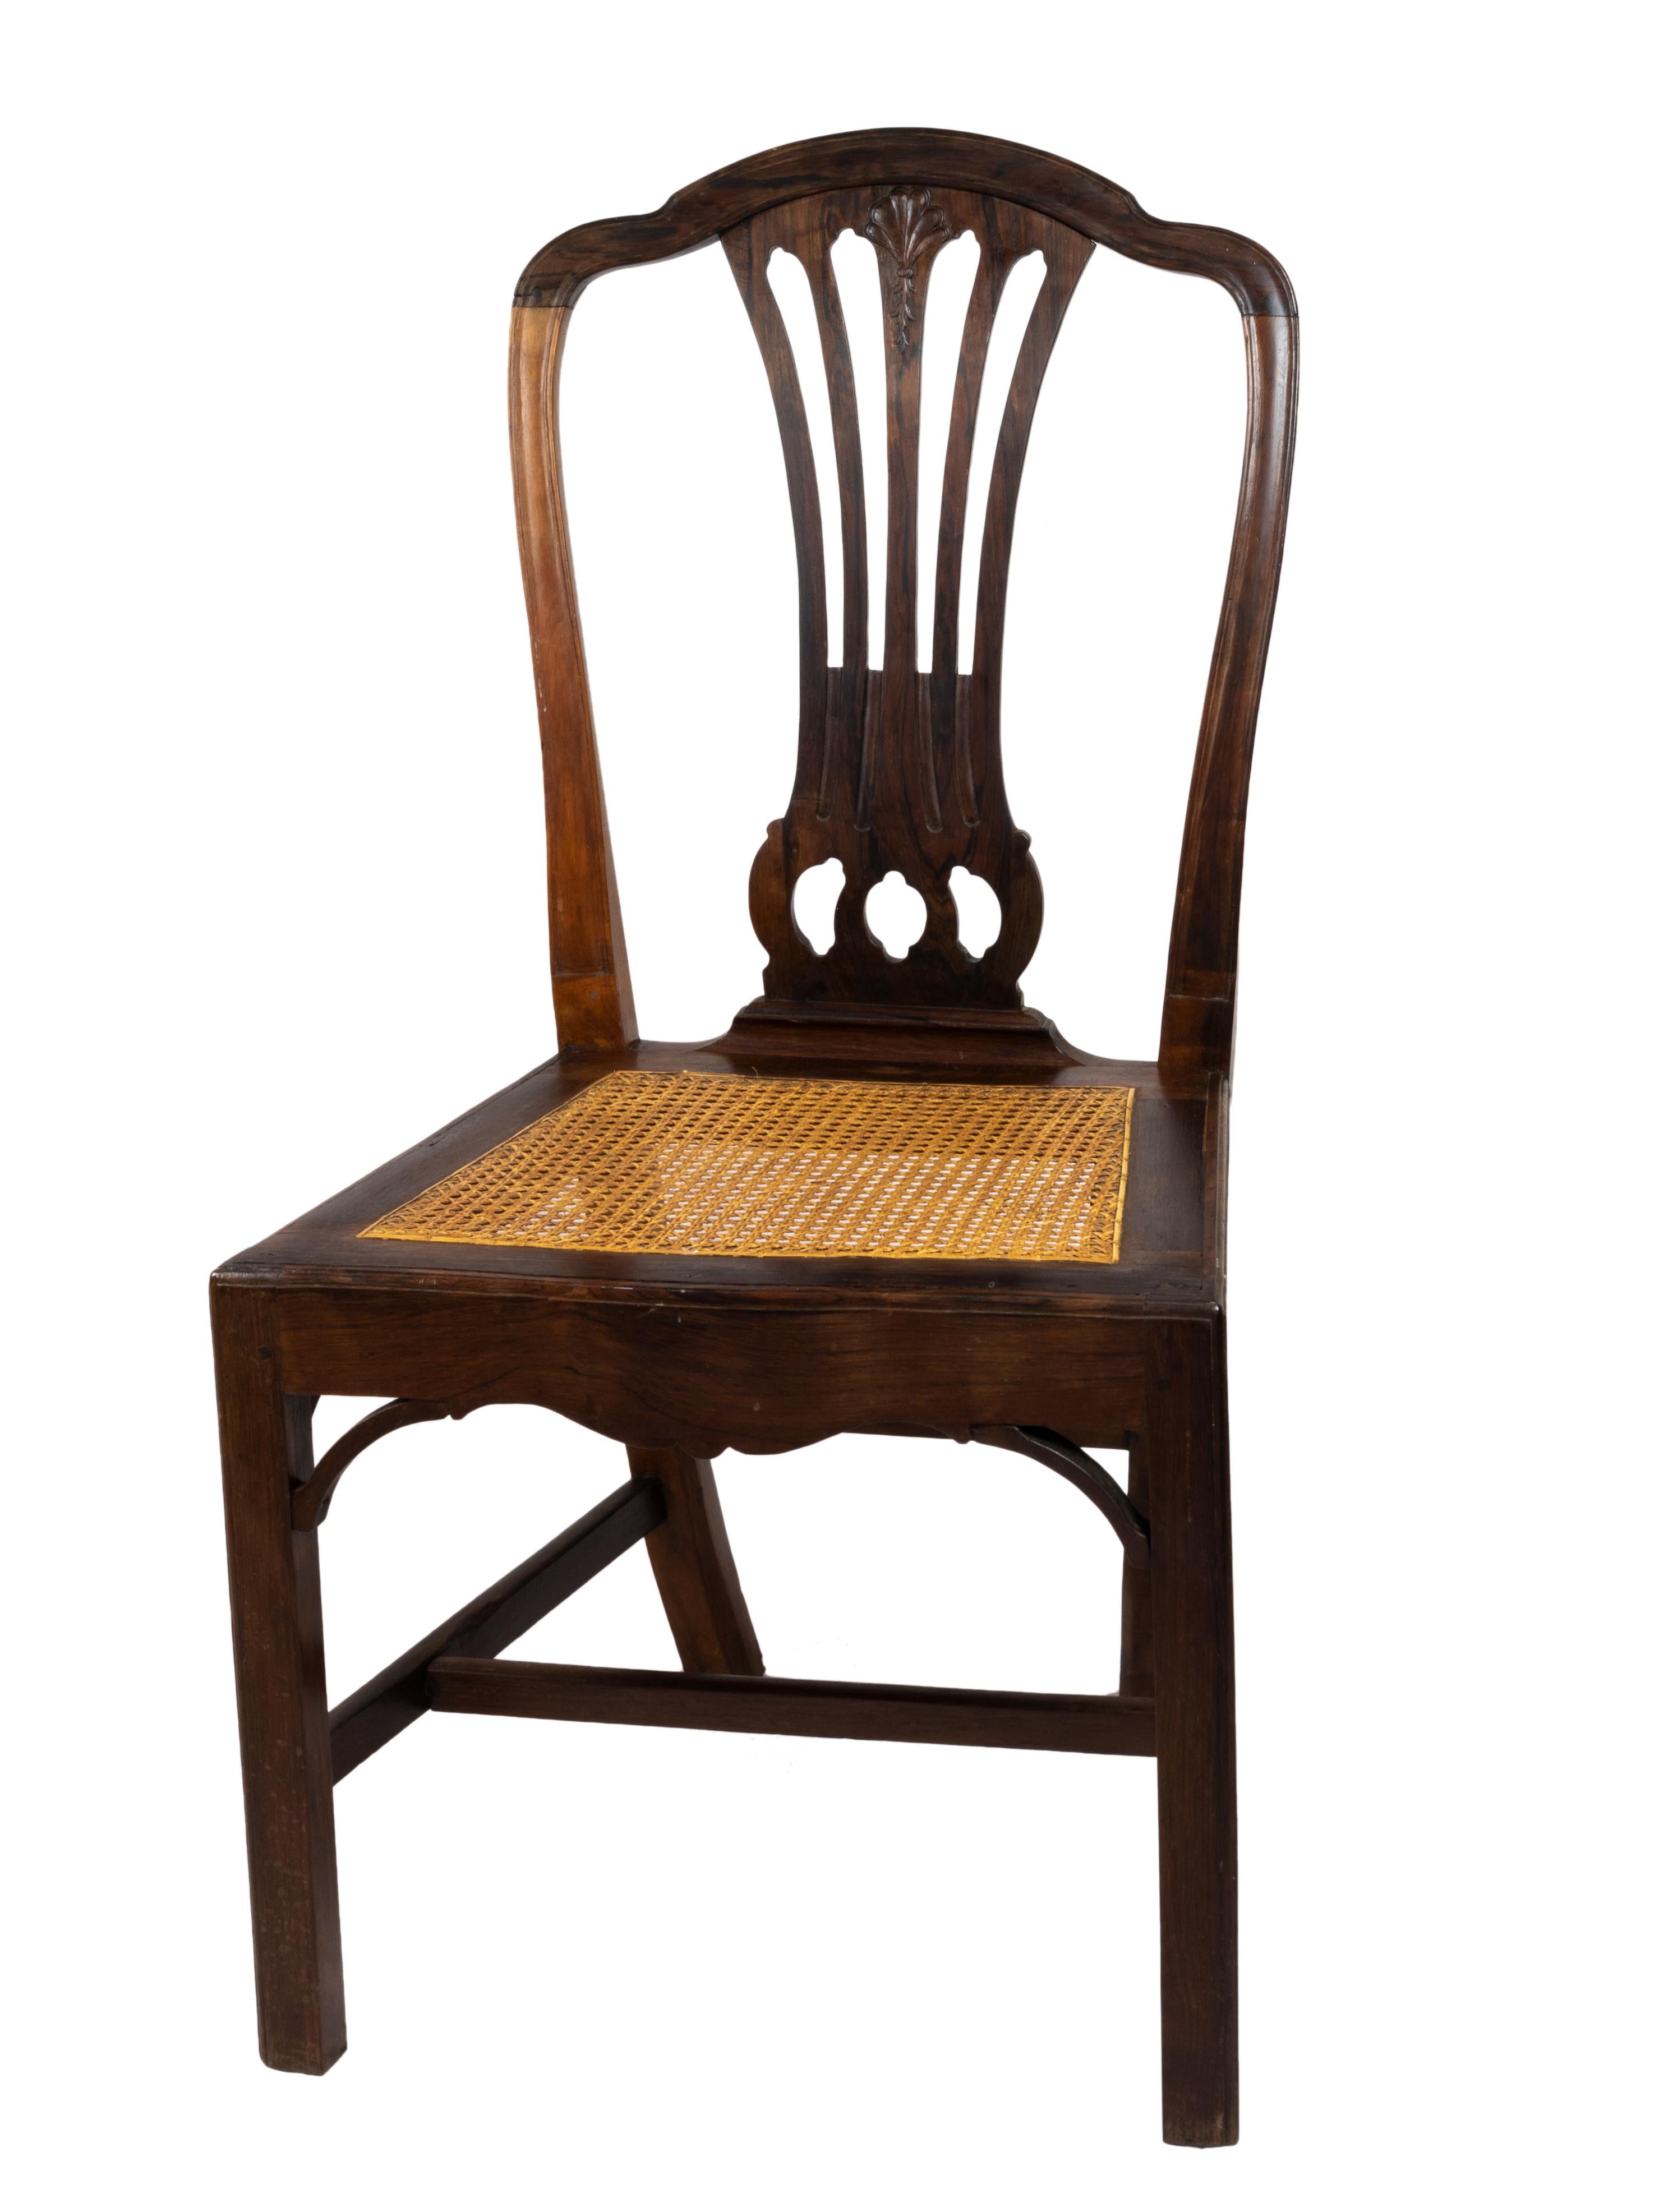 A portuguese chair in the shape of a classic amphora on the back, hollow back and seat of impeccable natural straw, rounded neck at the ends and front and rear legs of rectangular section, with oriental elements combined with neo-Gothic elements,